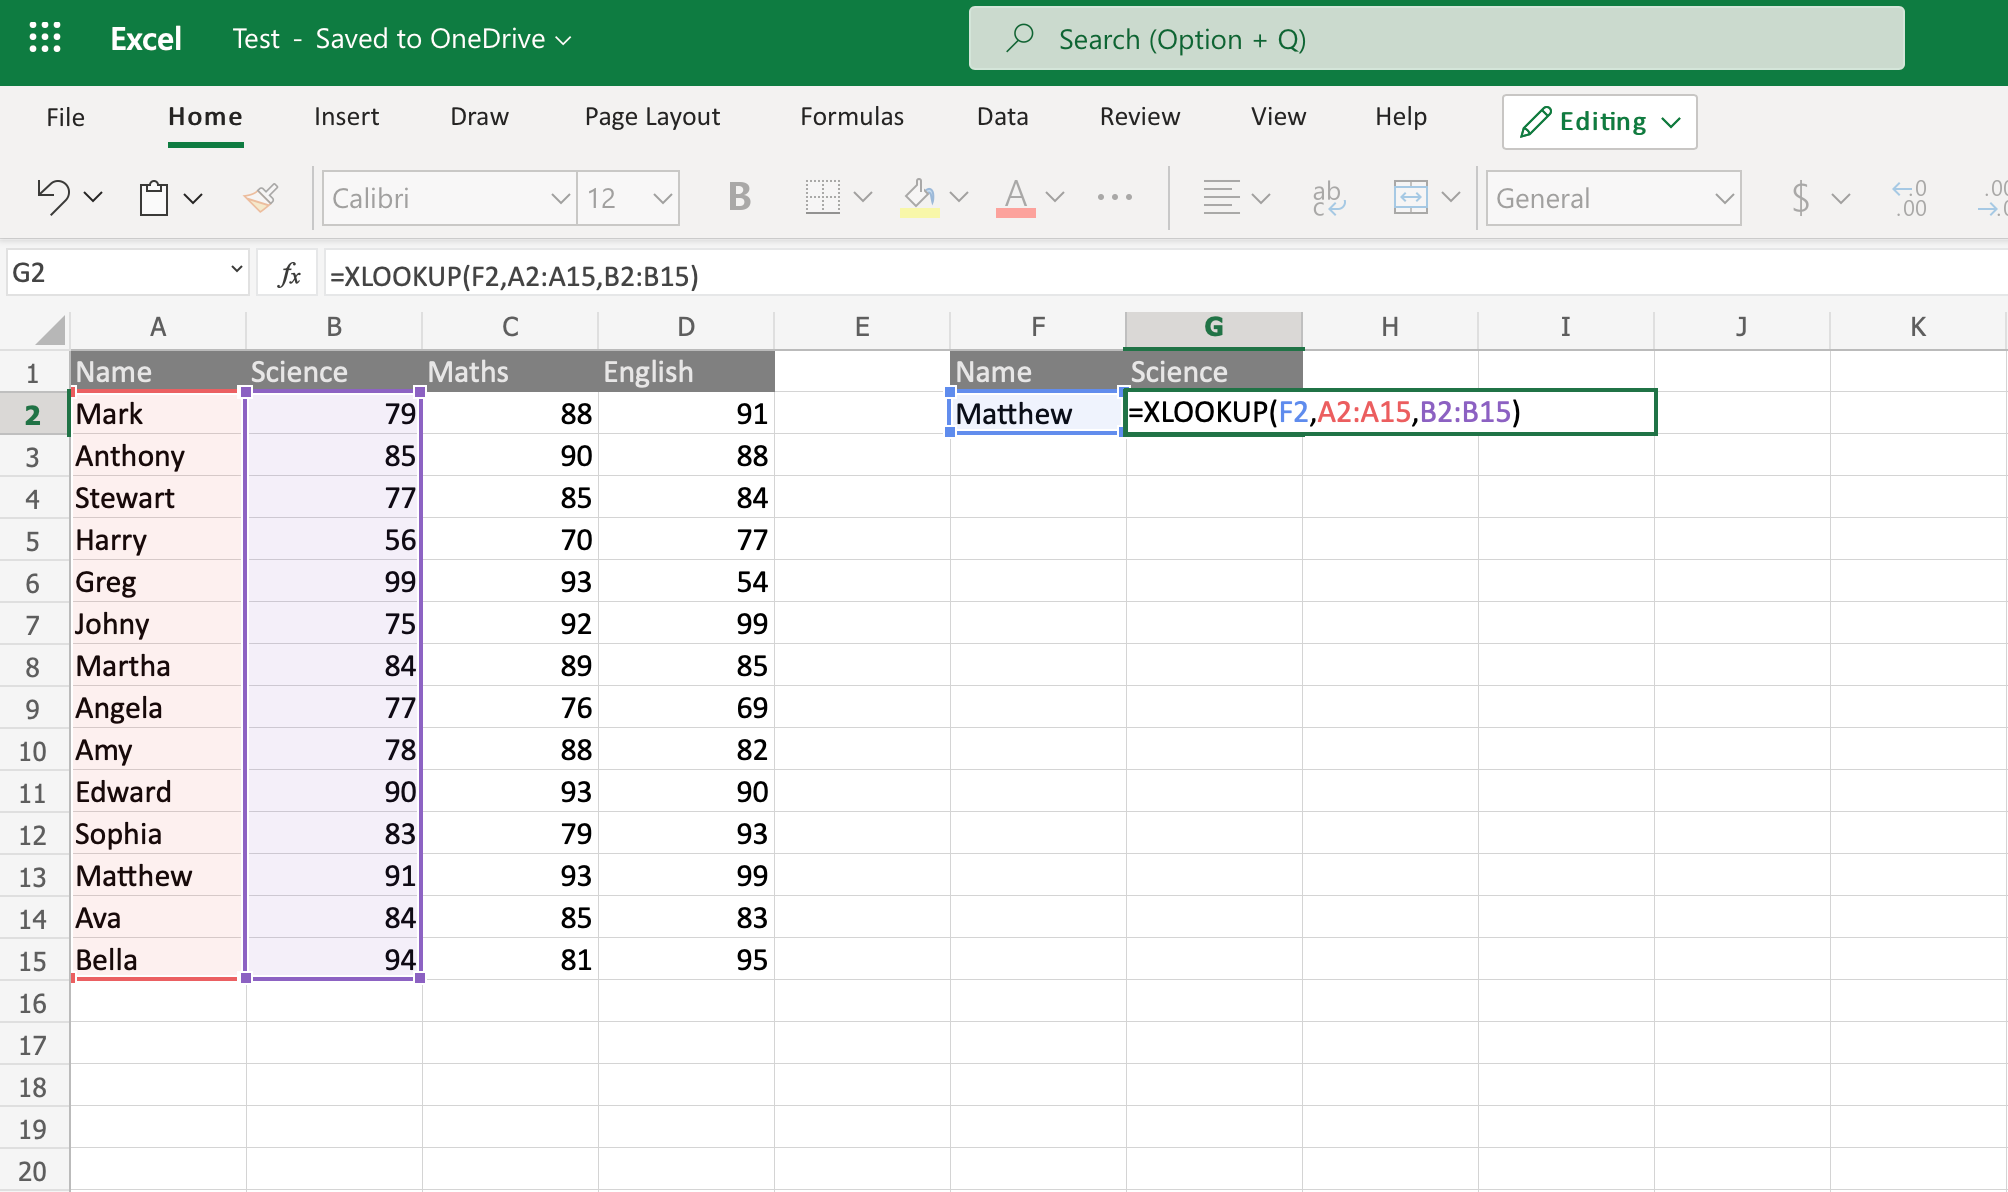 Copying XLOOKUP formula in cell